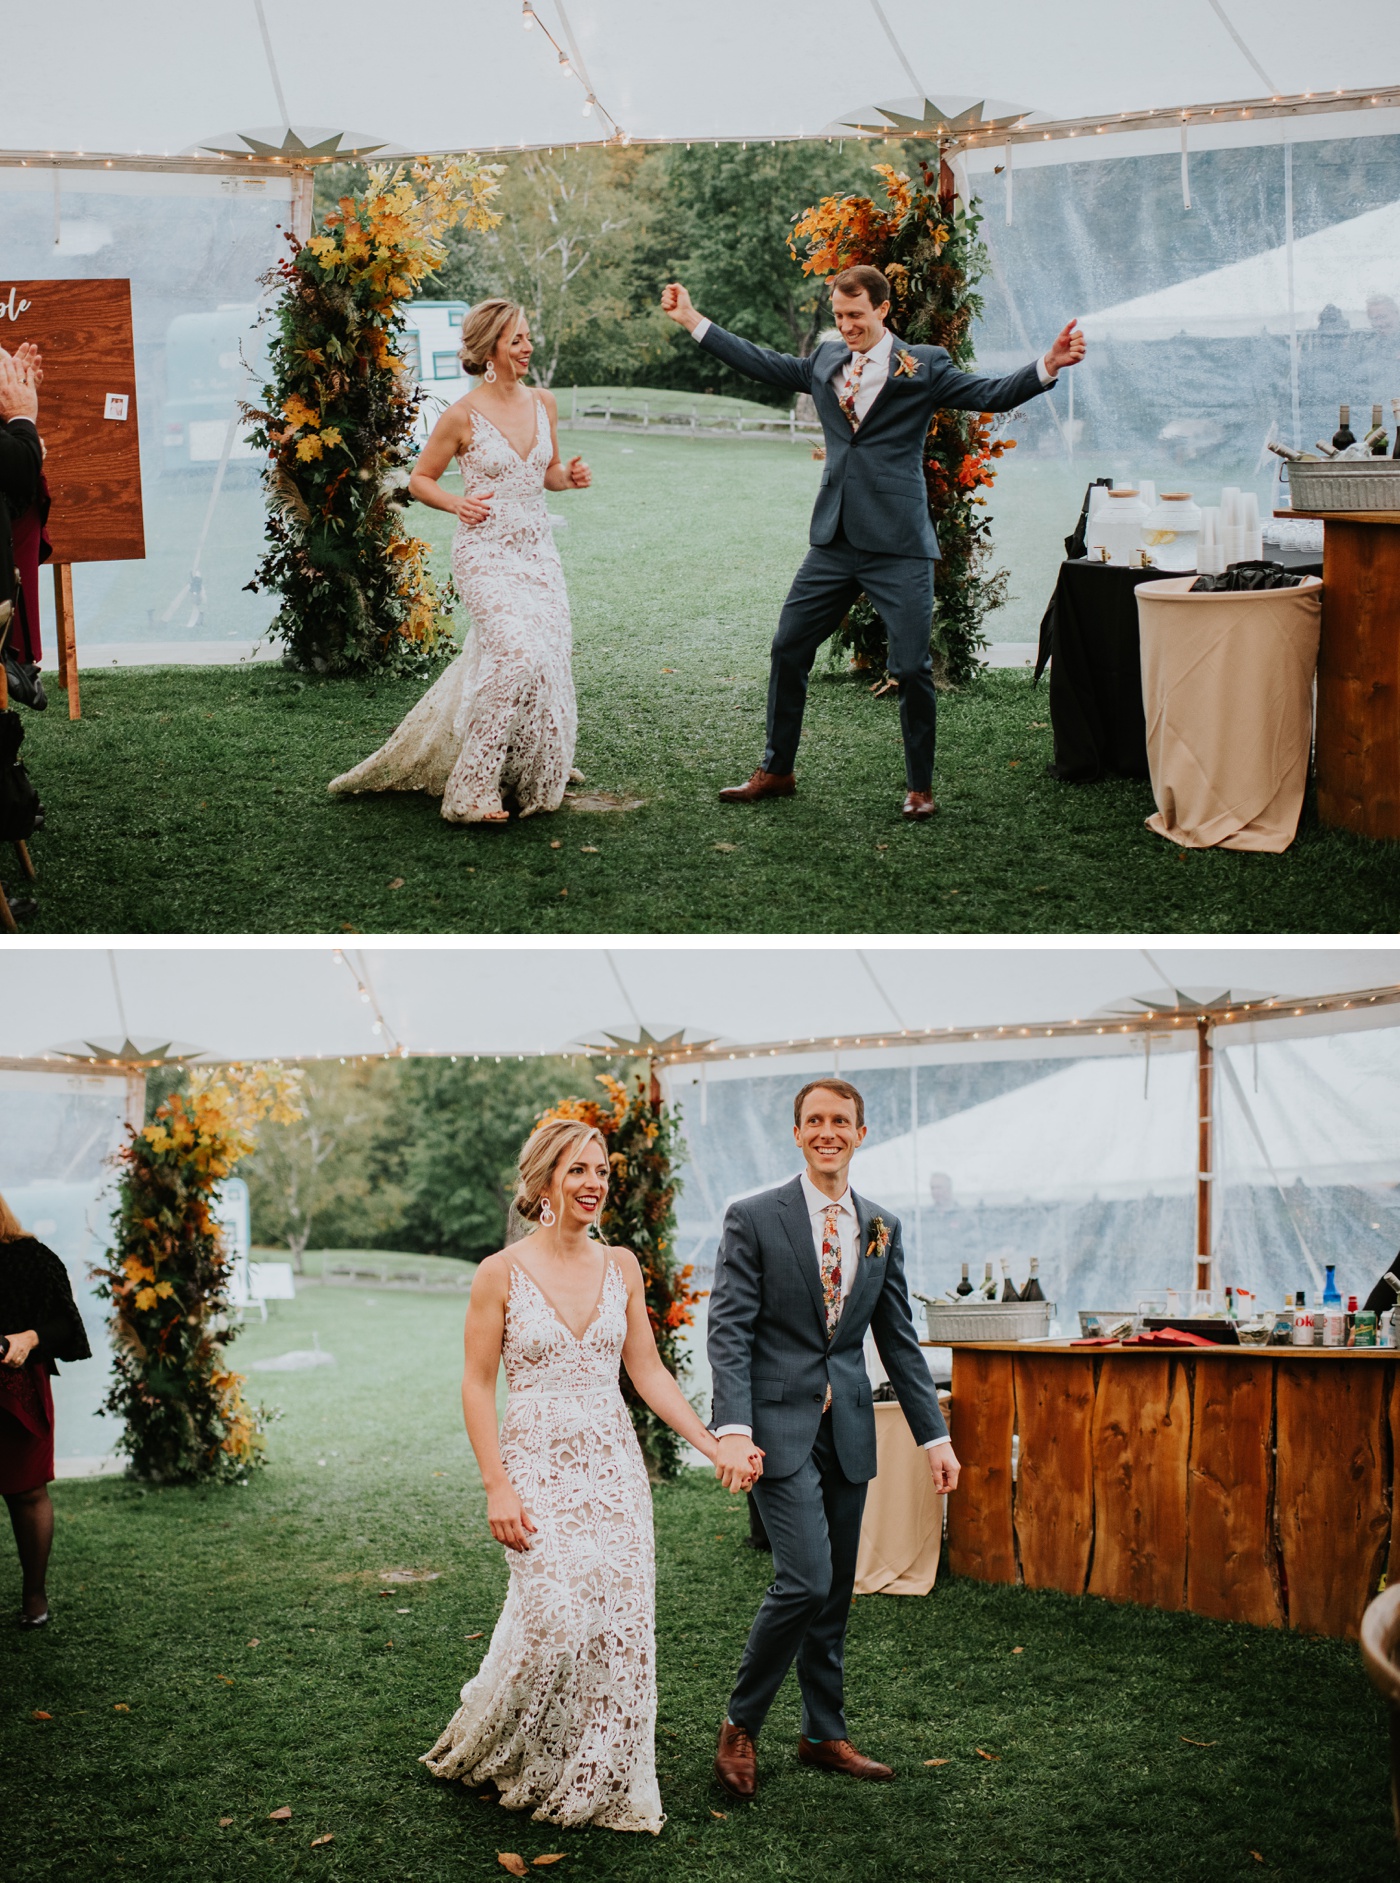 Tented wedding reception at Toad Hill Farm